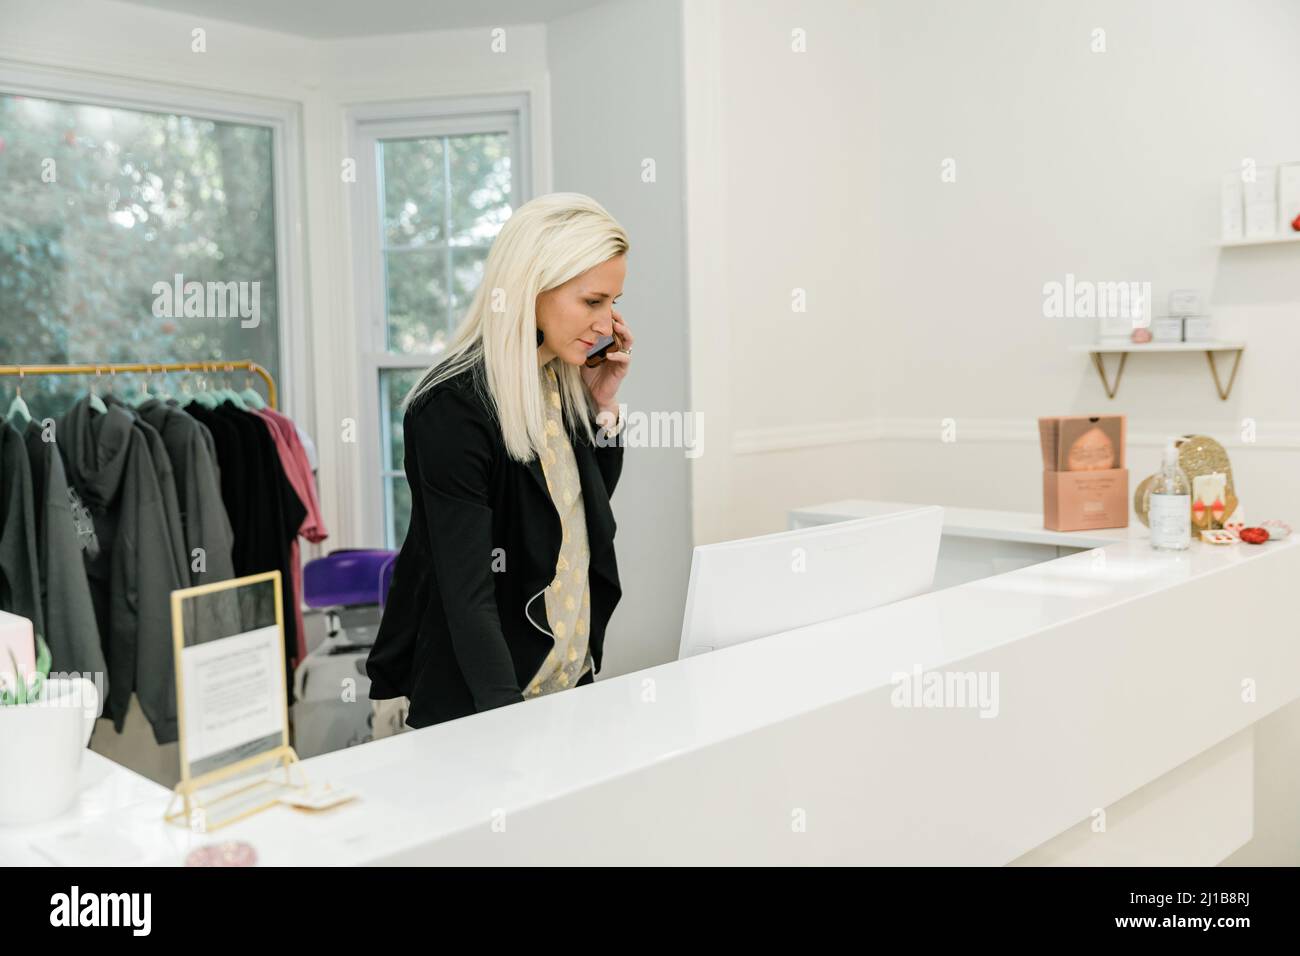 A female small business owner of a medical spa and retail shop standing behind the counter with a computer working Stock Photo